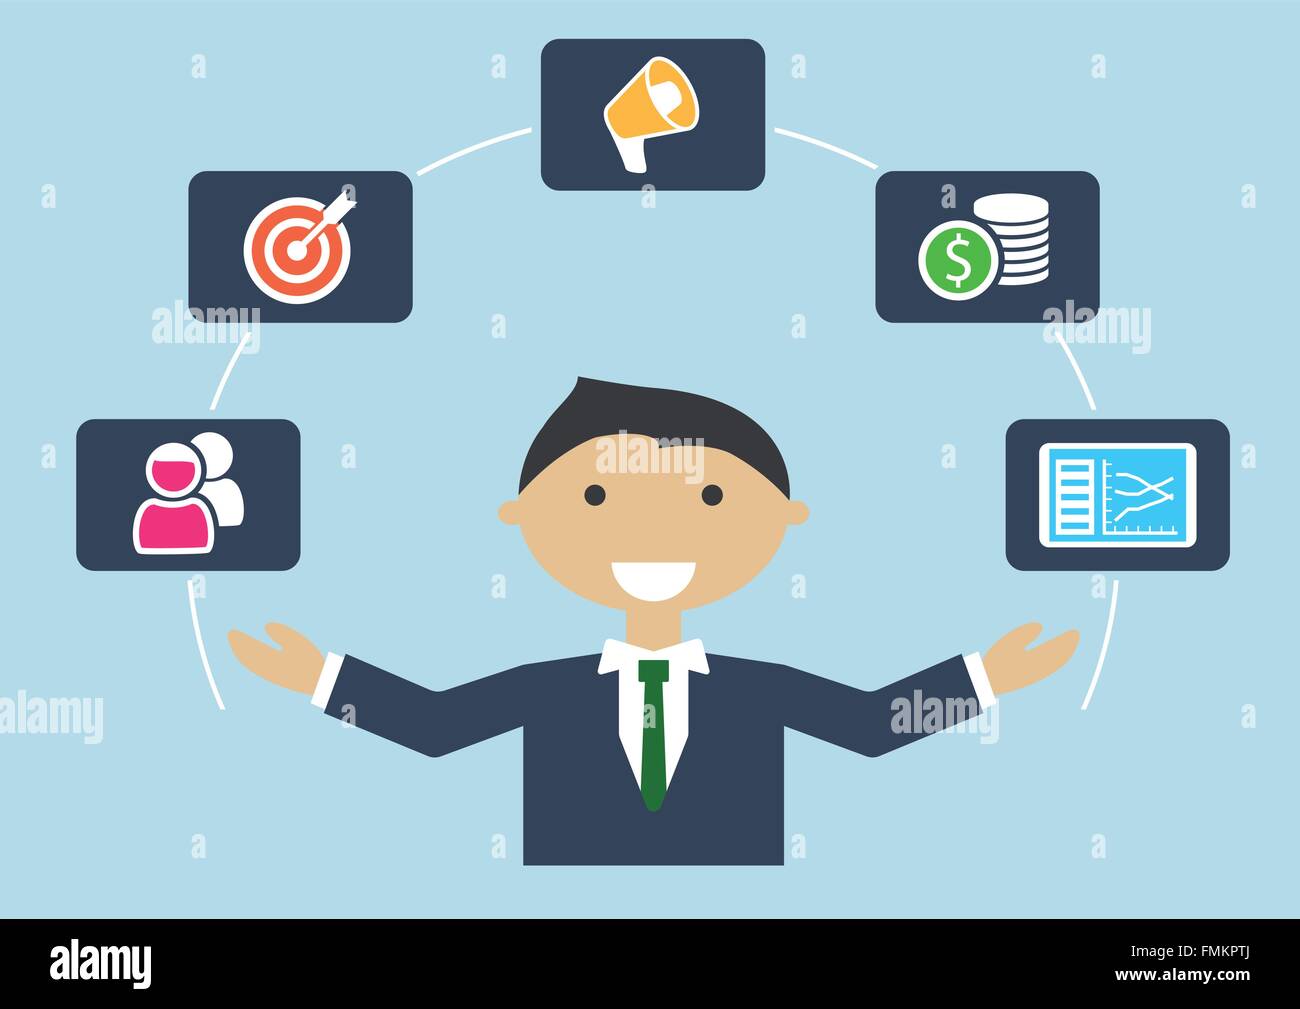 People at work: vector illustration of marketing manager or marketing expert job profile Stock Vector